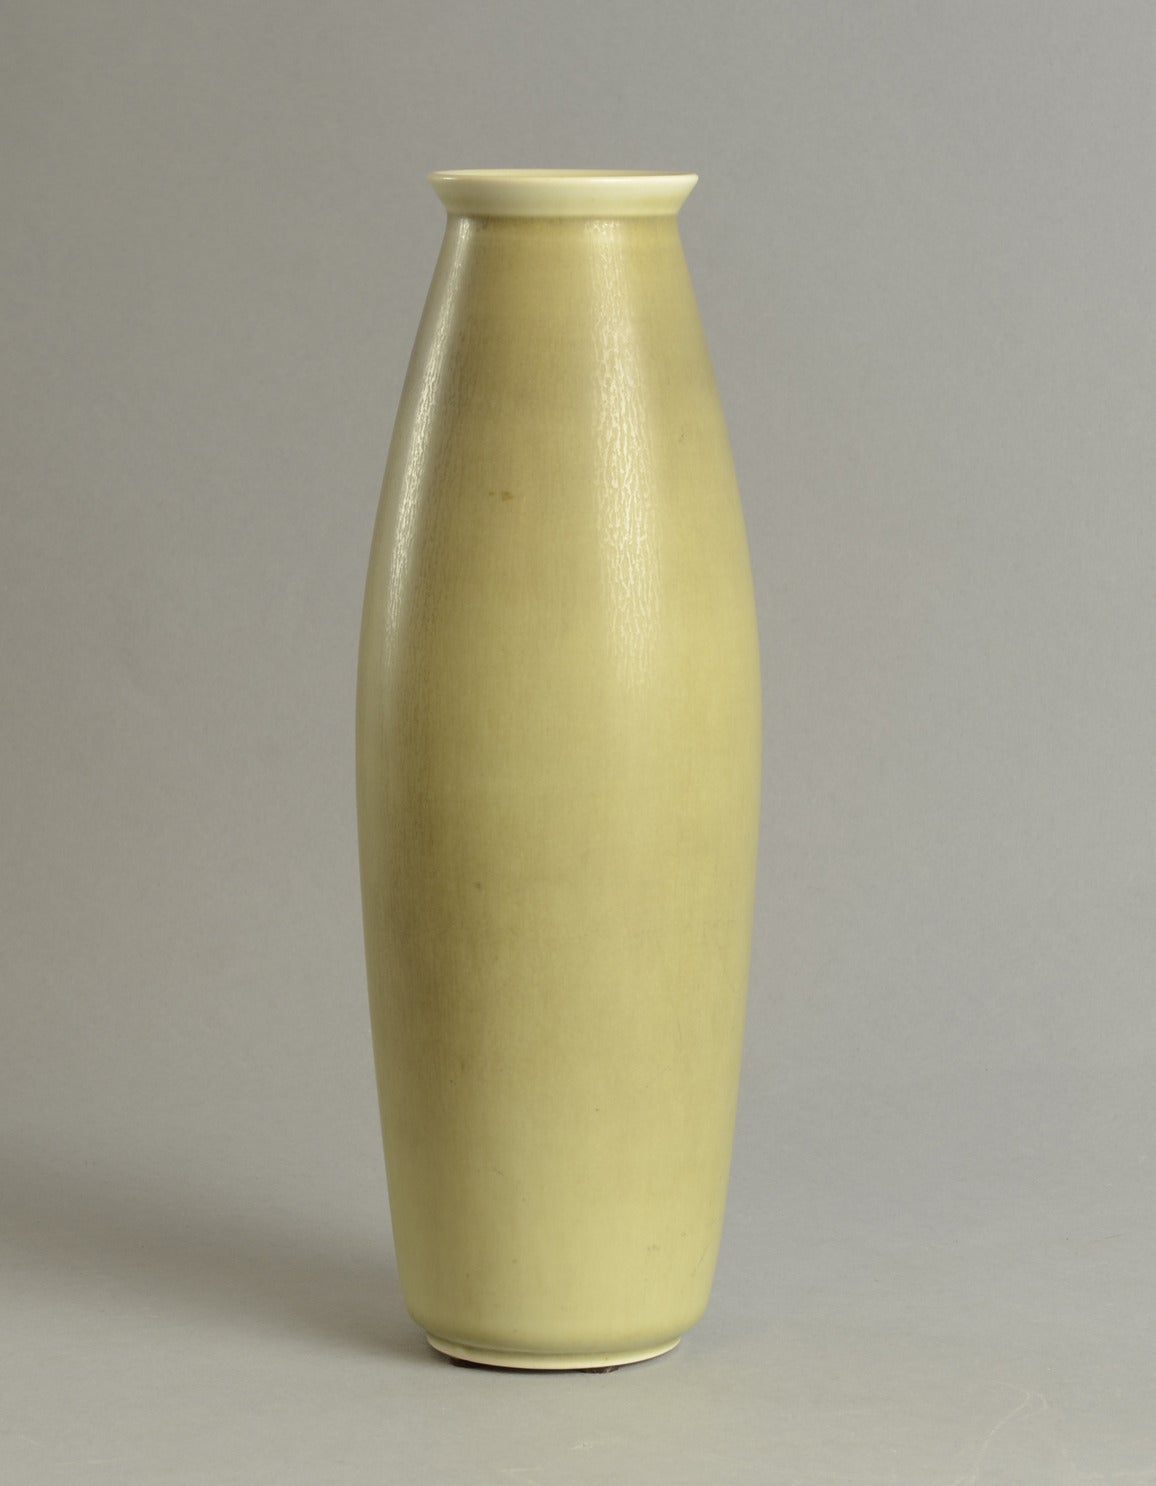 Available Separately

1. Stoneware vase with blue haresfur glaze, 1960s.
Height 3 3/4